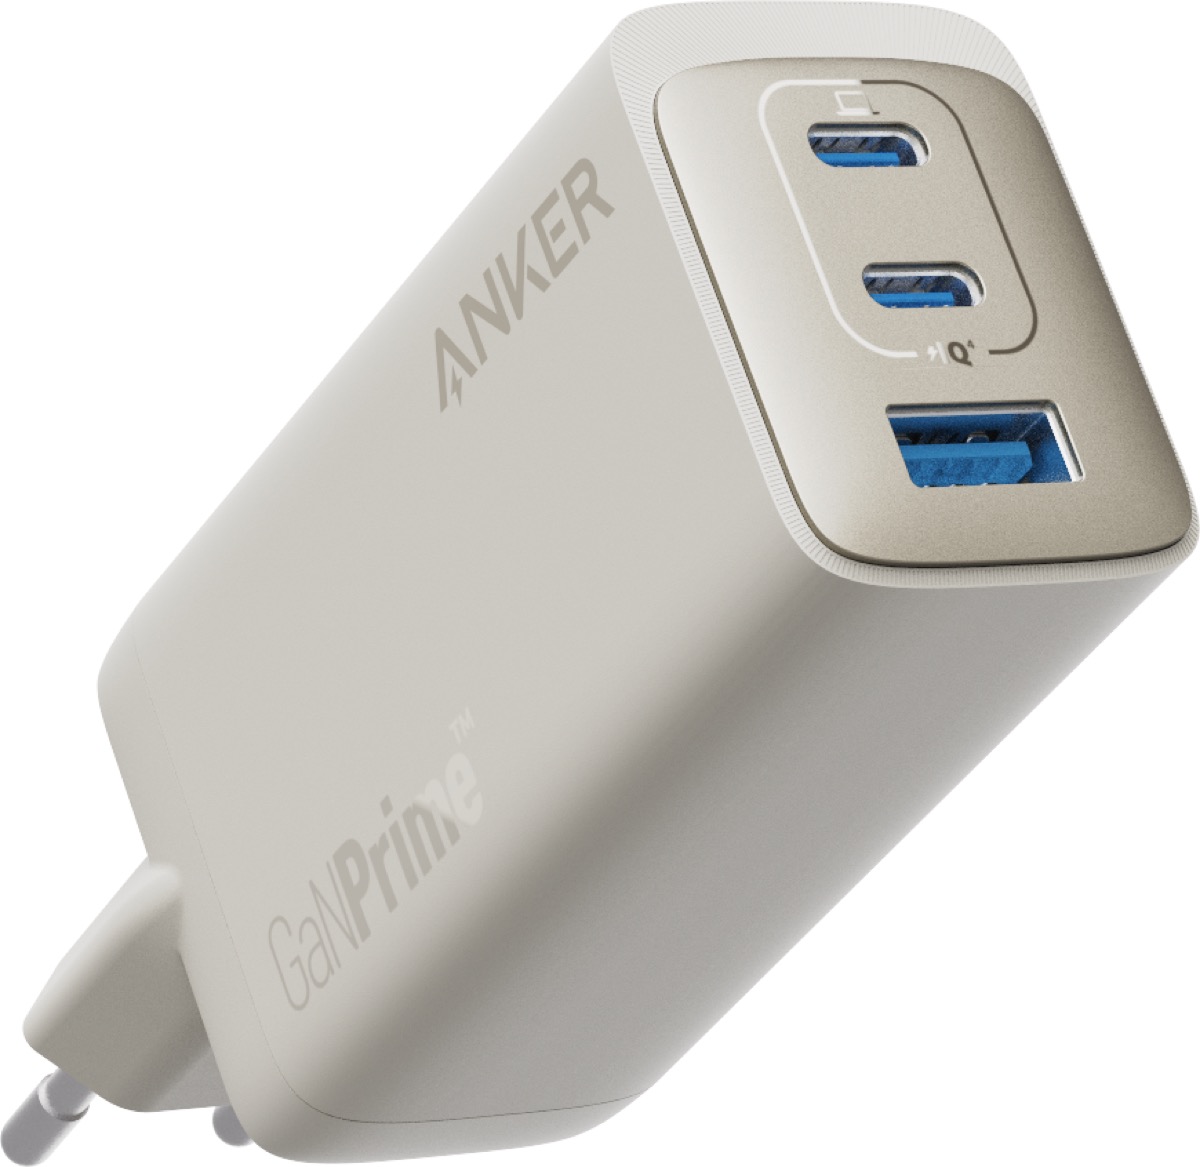 Anker introduces 6 new compact chargers from GaN